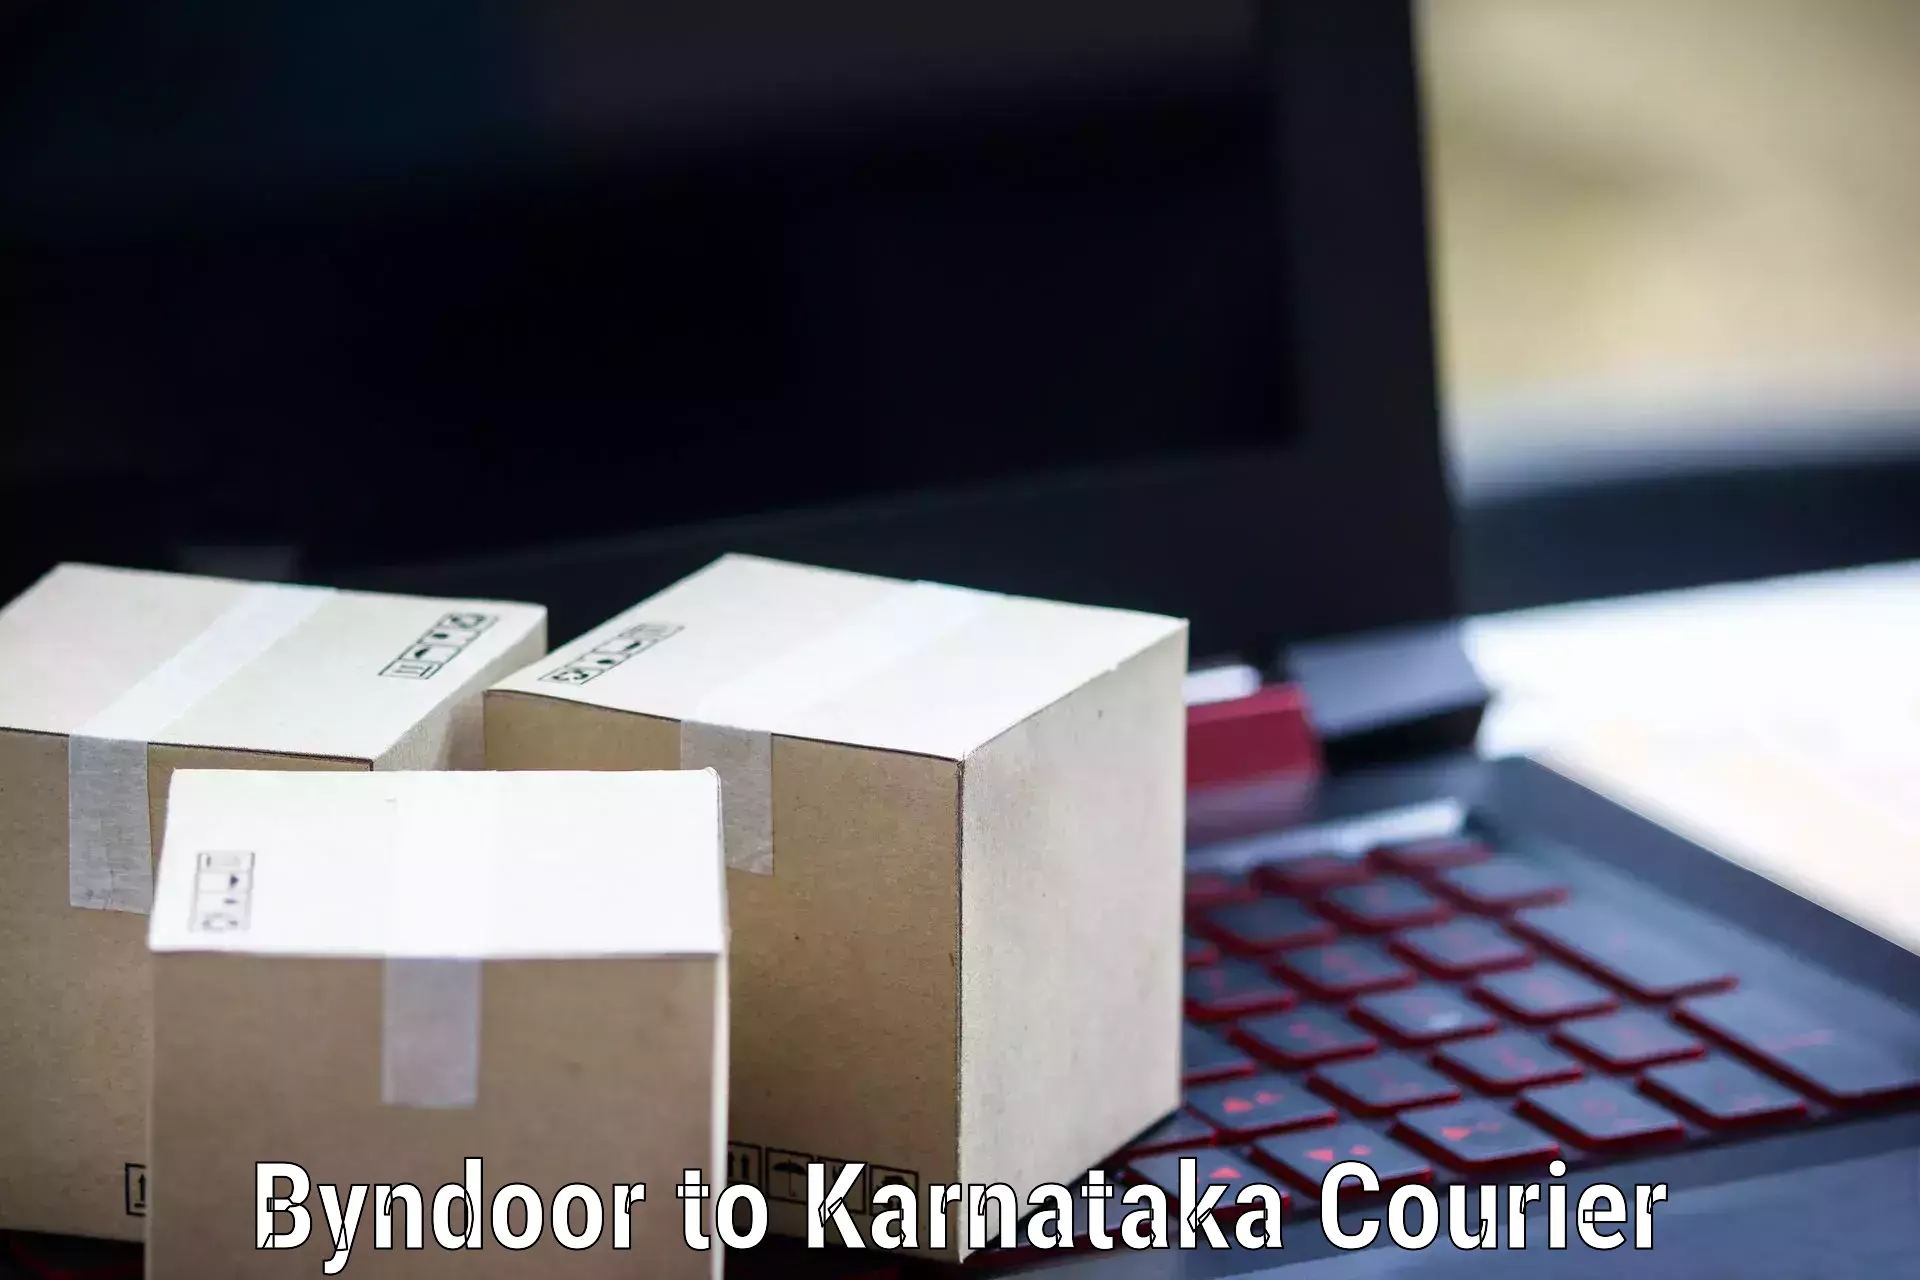 Courier service partnerships Byndoor to Mangalore